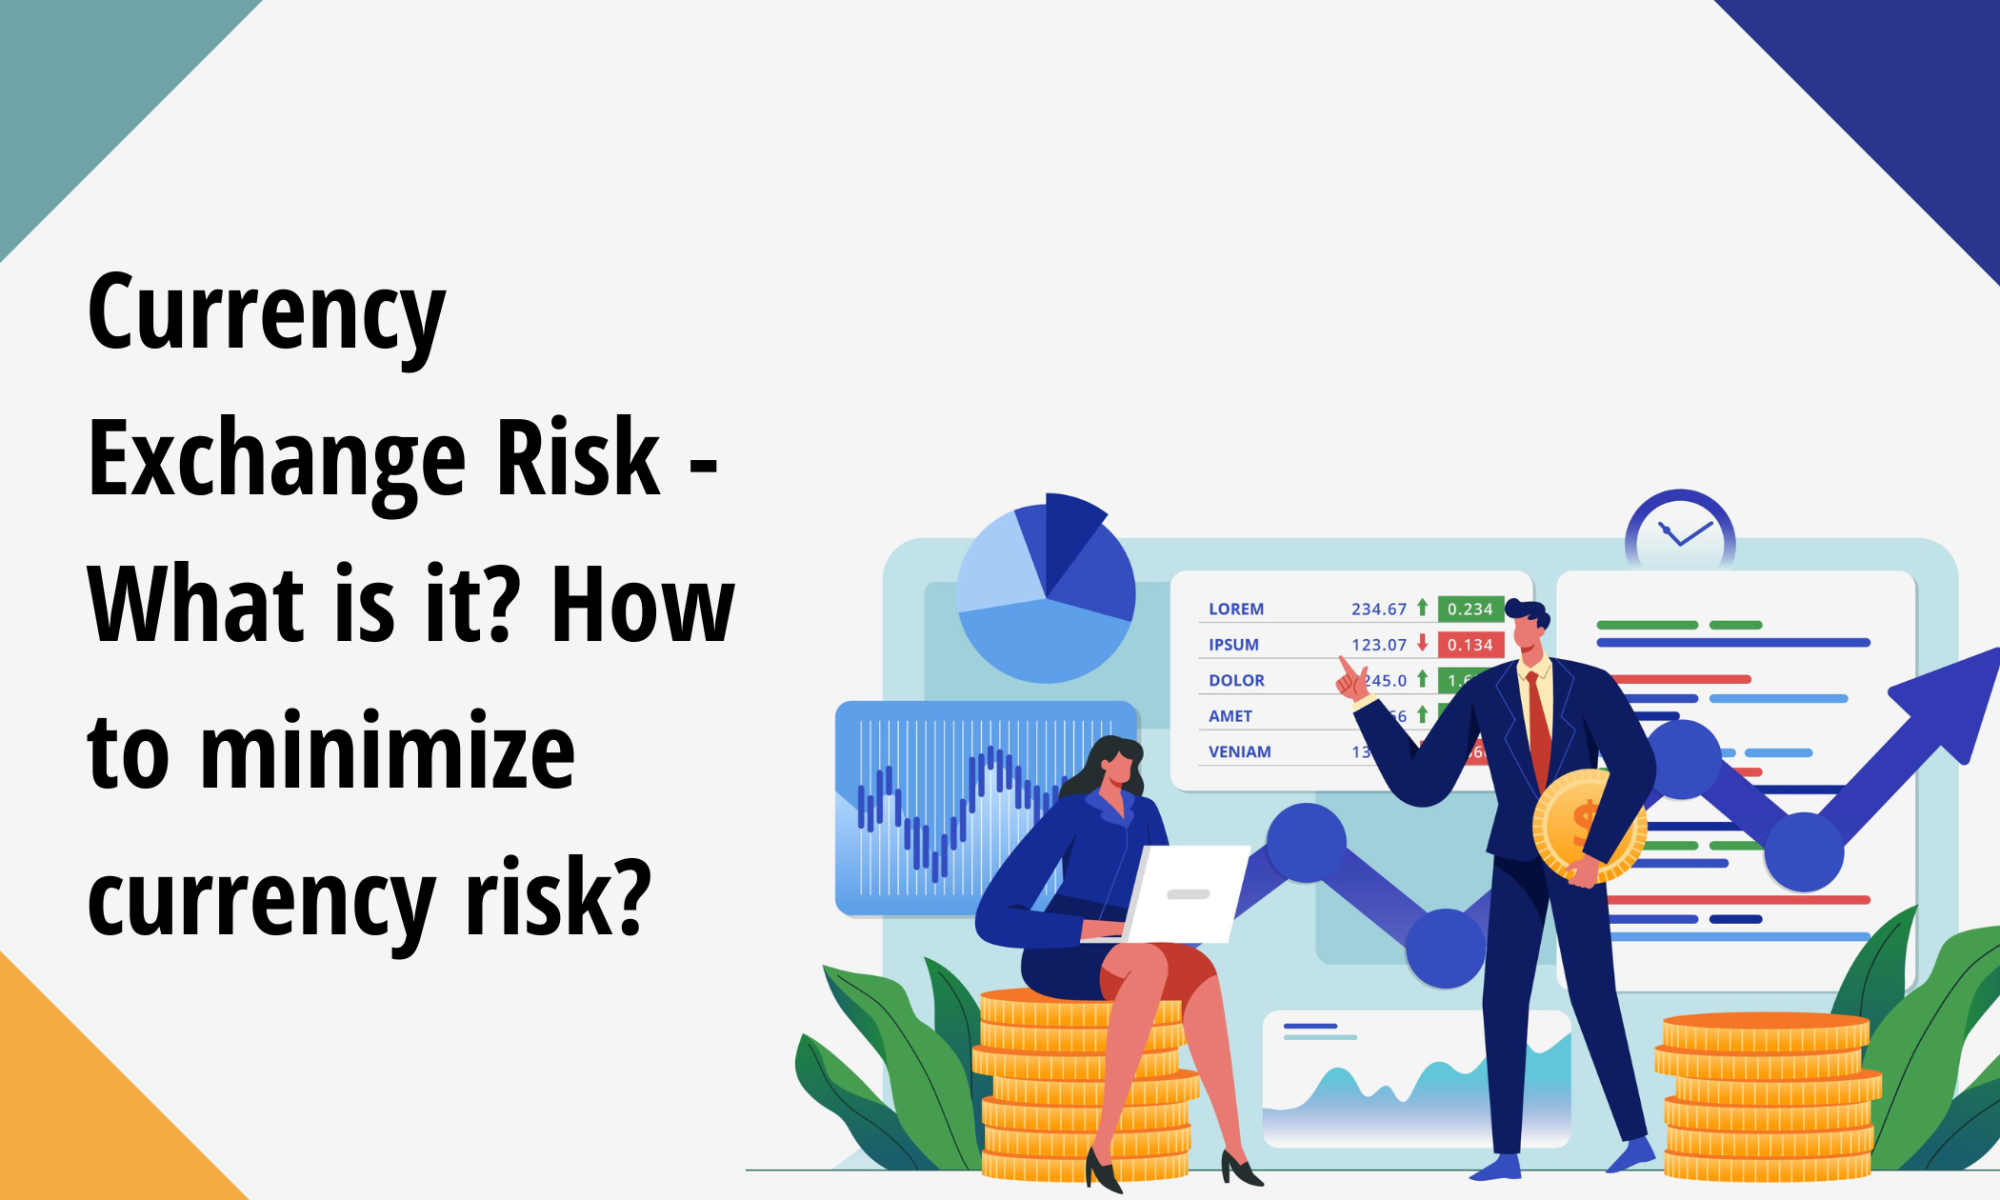 Currency exchange risk